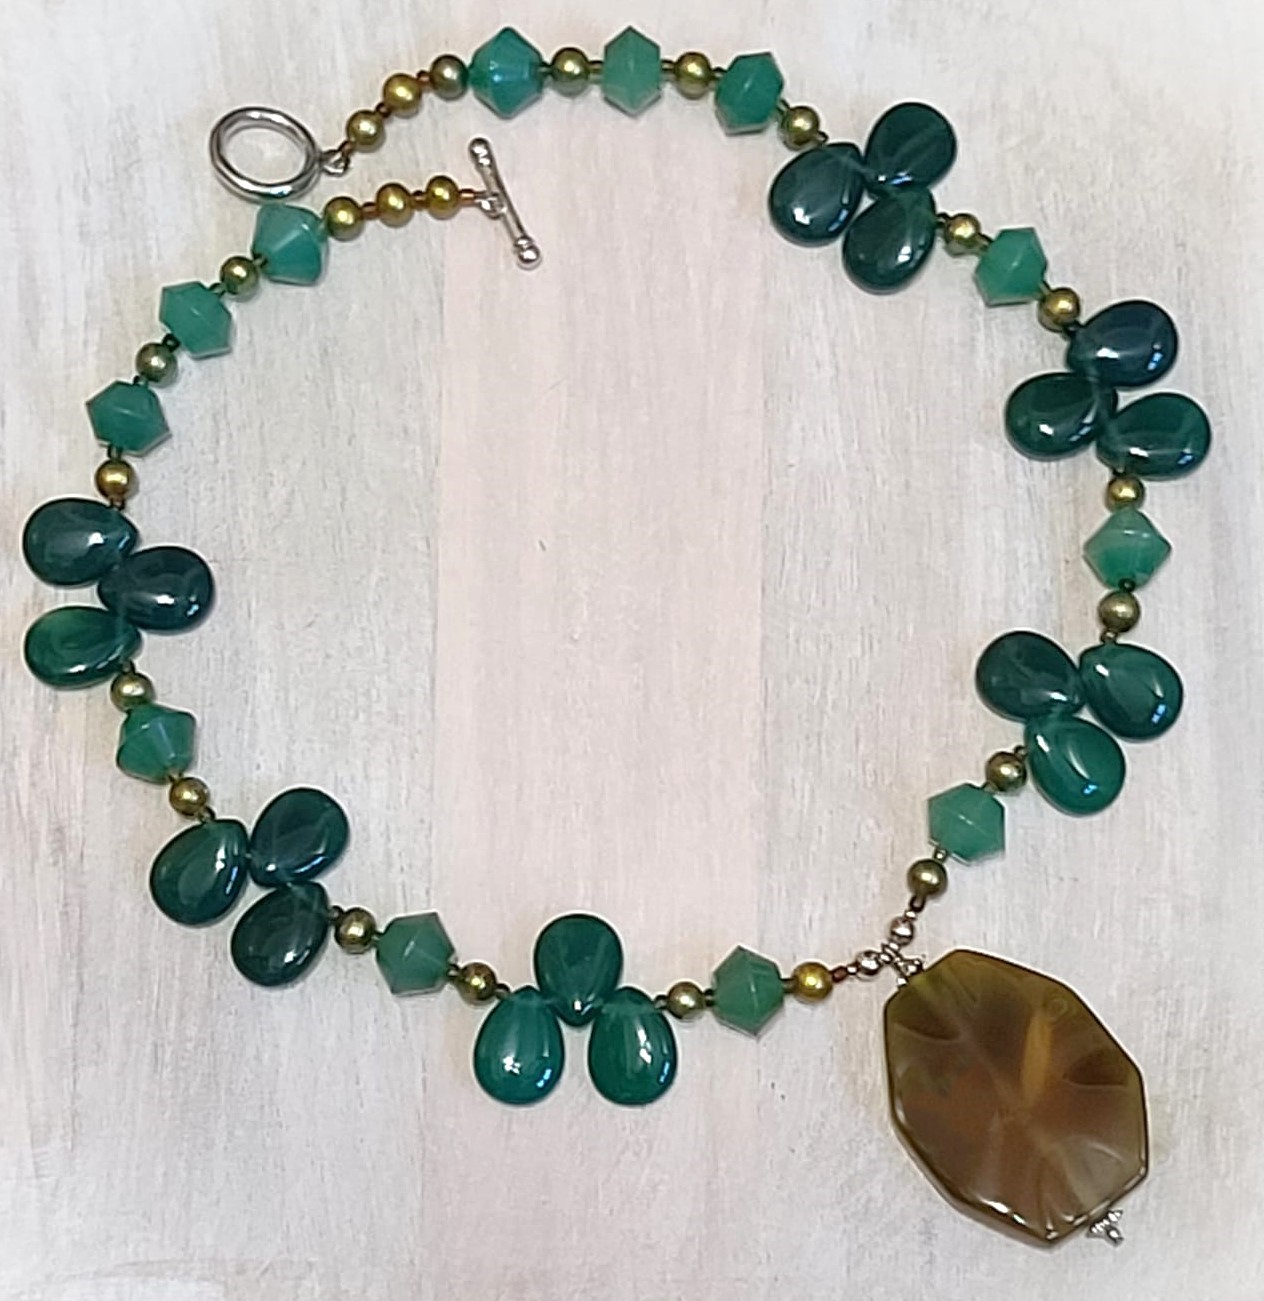 Green agate and freshwater pearl gemstone necklace